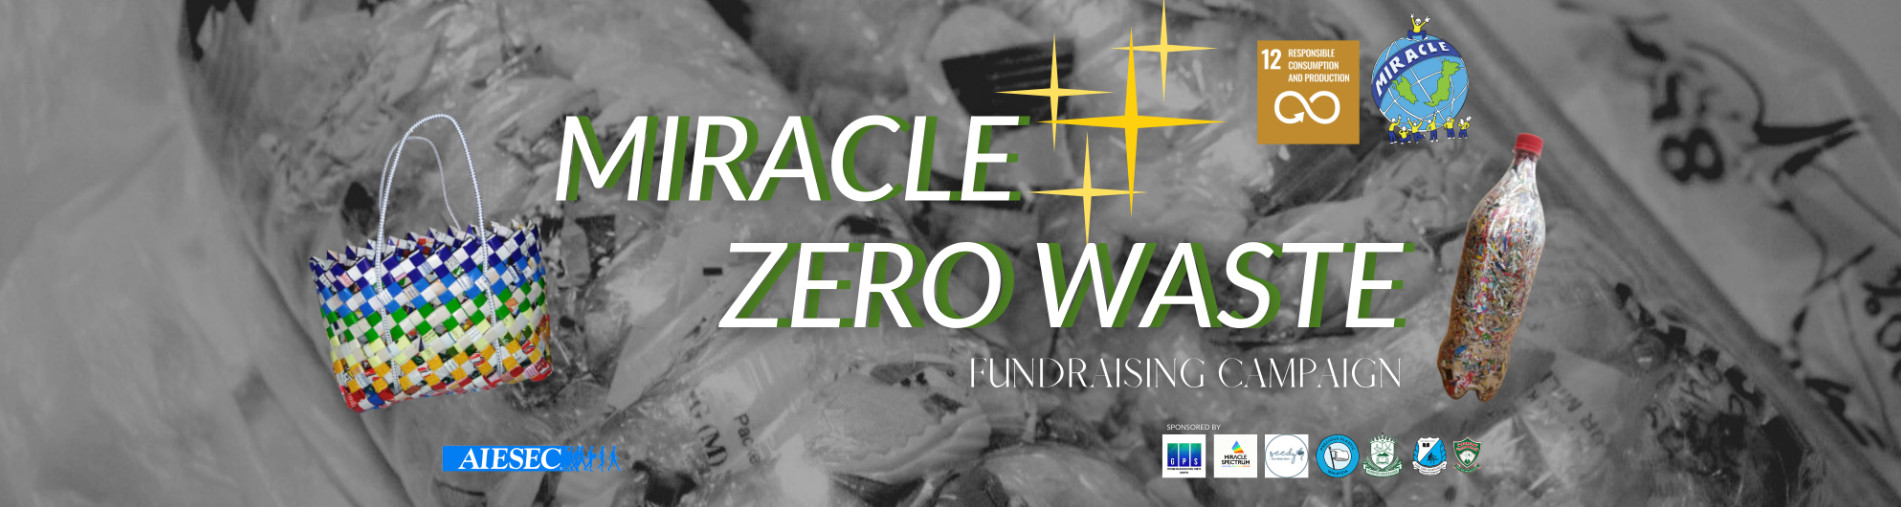 MIRACLE Zero Waste Fundraising Campaign